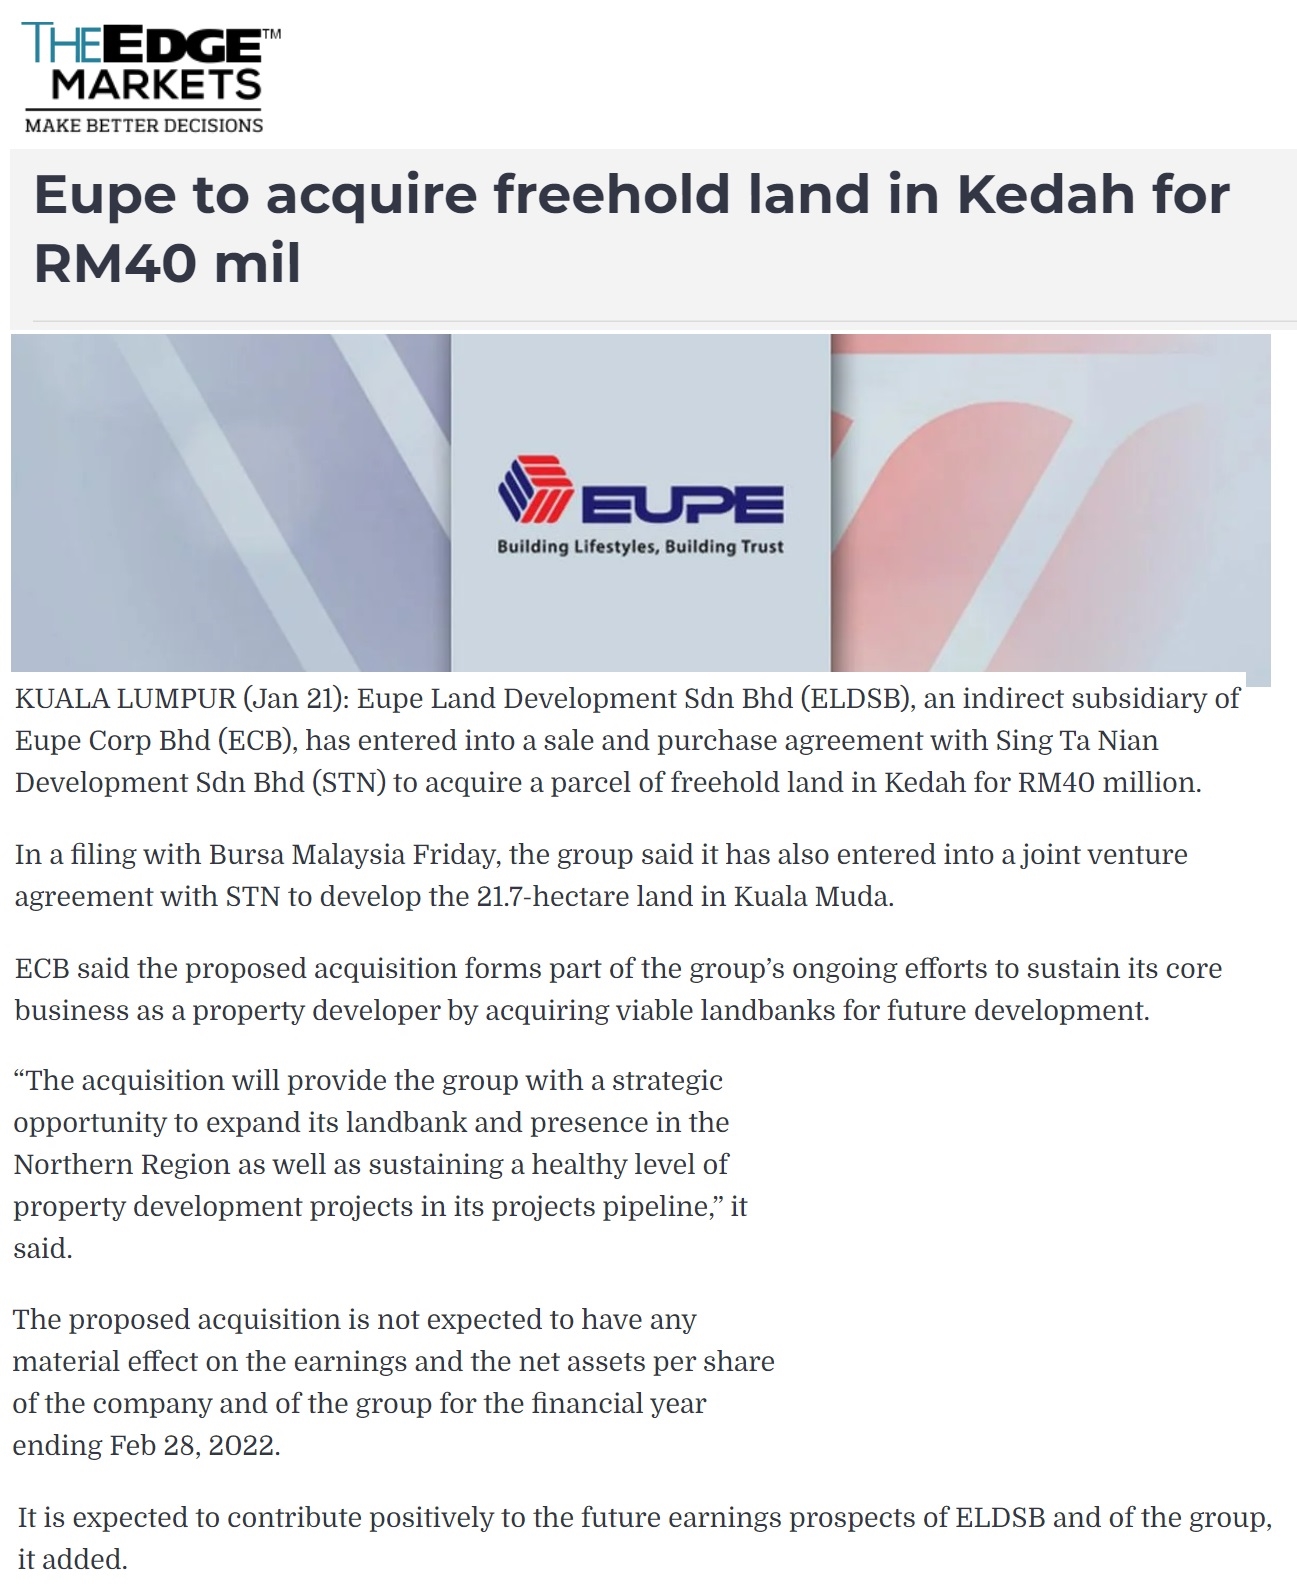 The Edge, The Star, Berita Harian : Acquisition of Freehold Land in Kedah